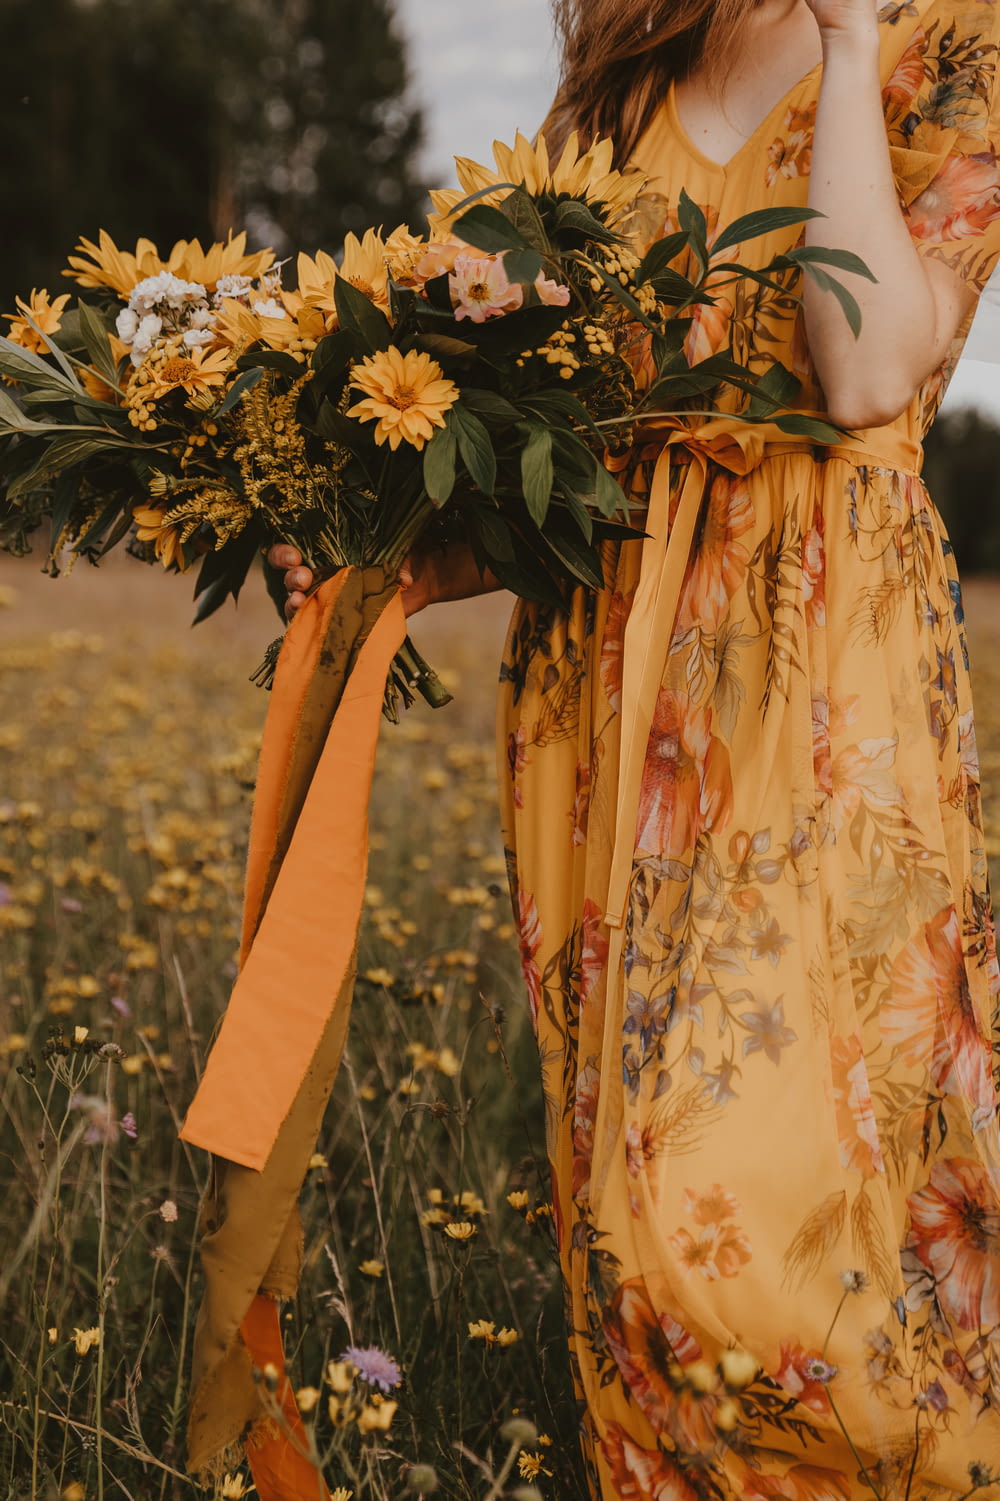 a person wearing a yellow dress with flowers on it